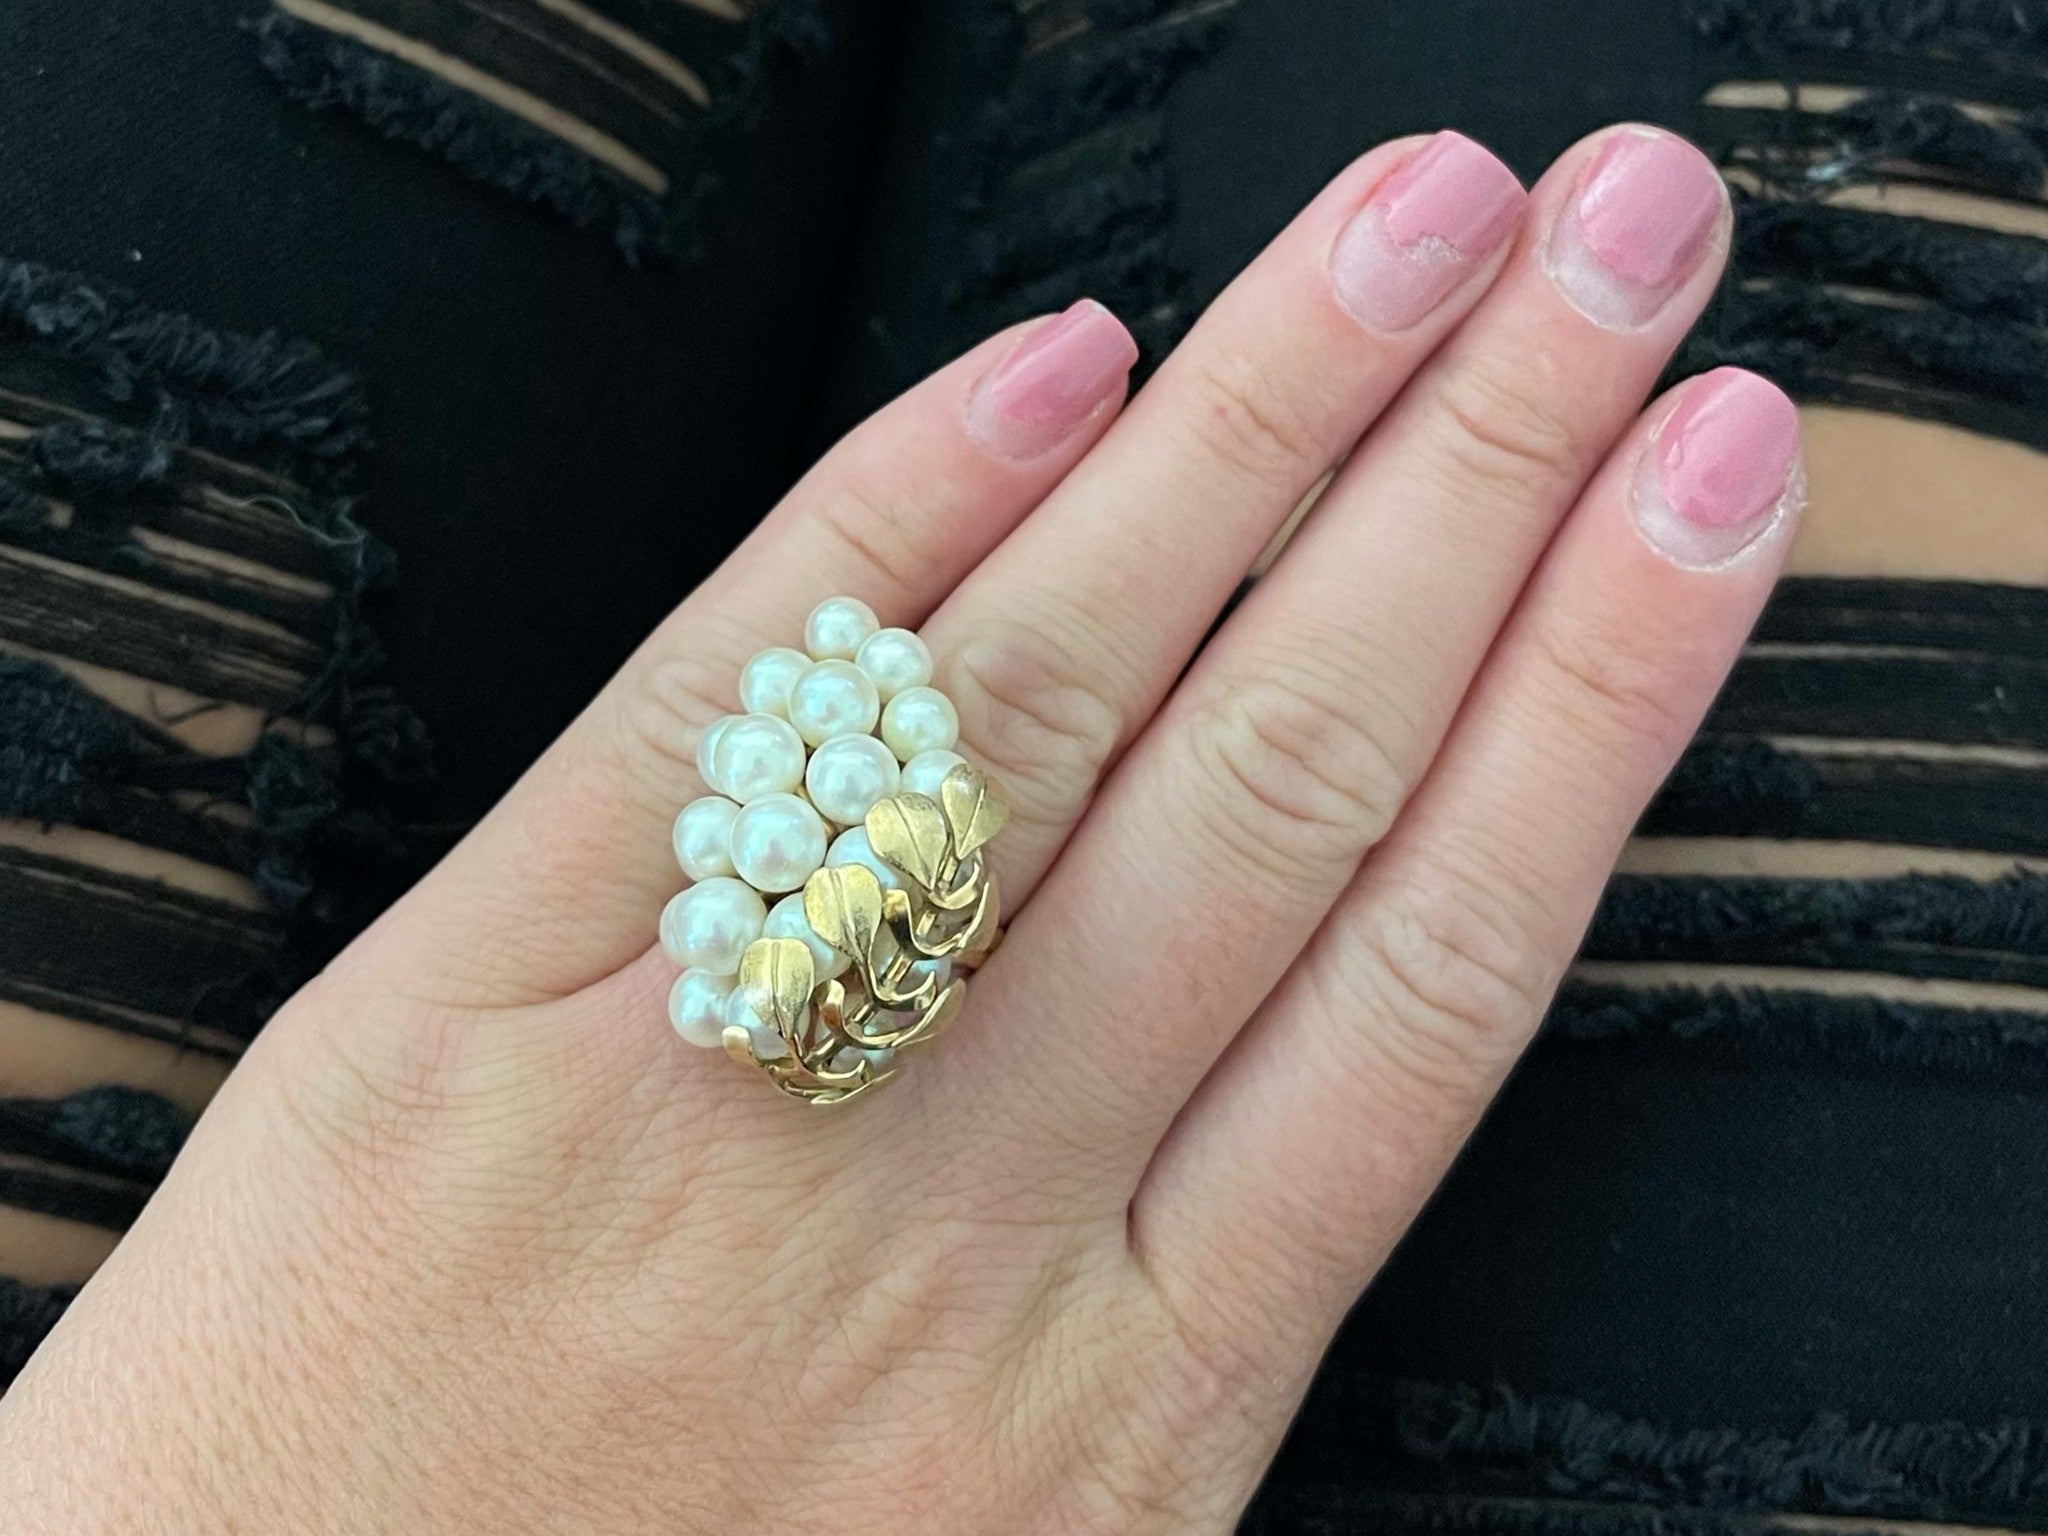 Mings Large Akoya Pearl Leaf Ring in 14k Yellow Gold